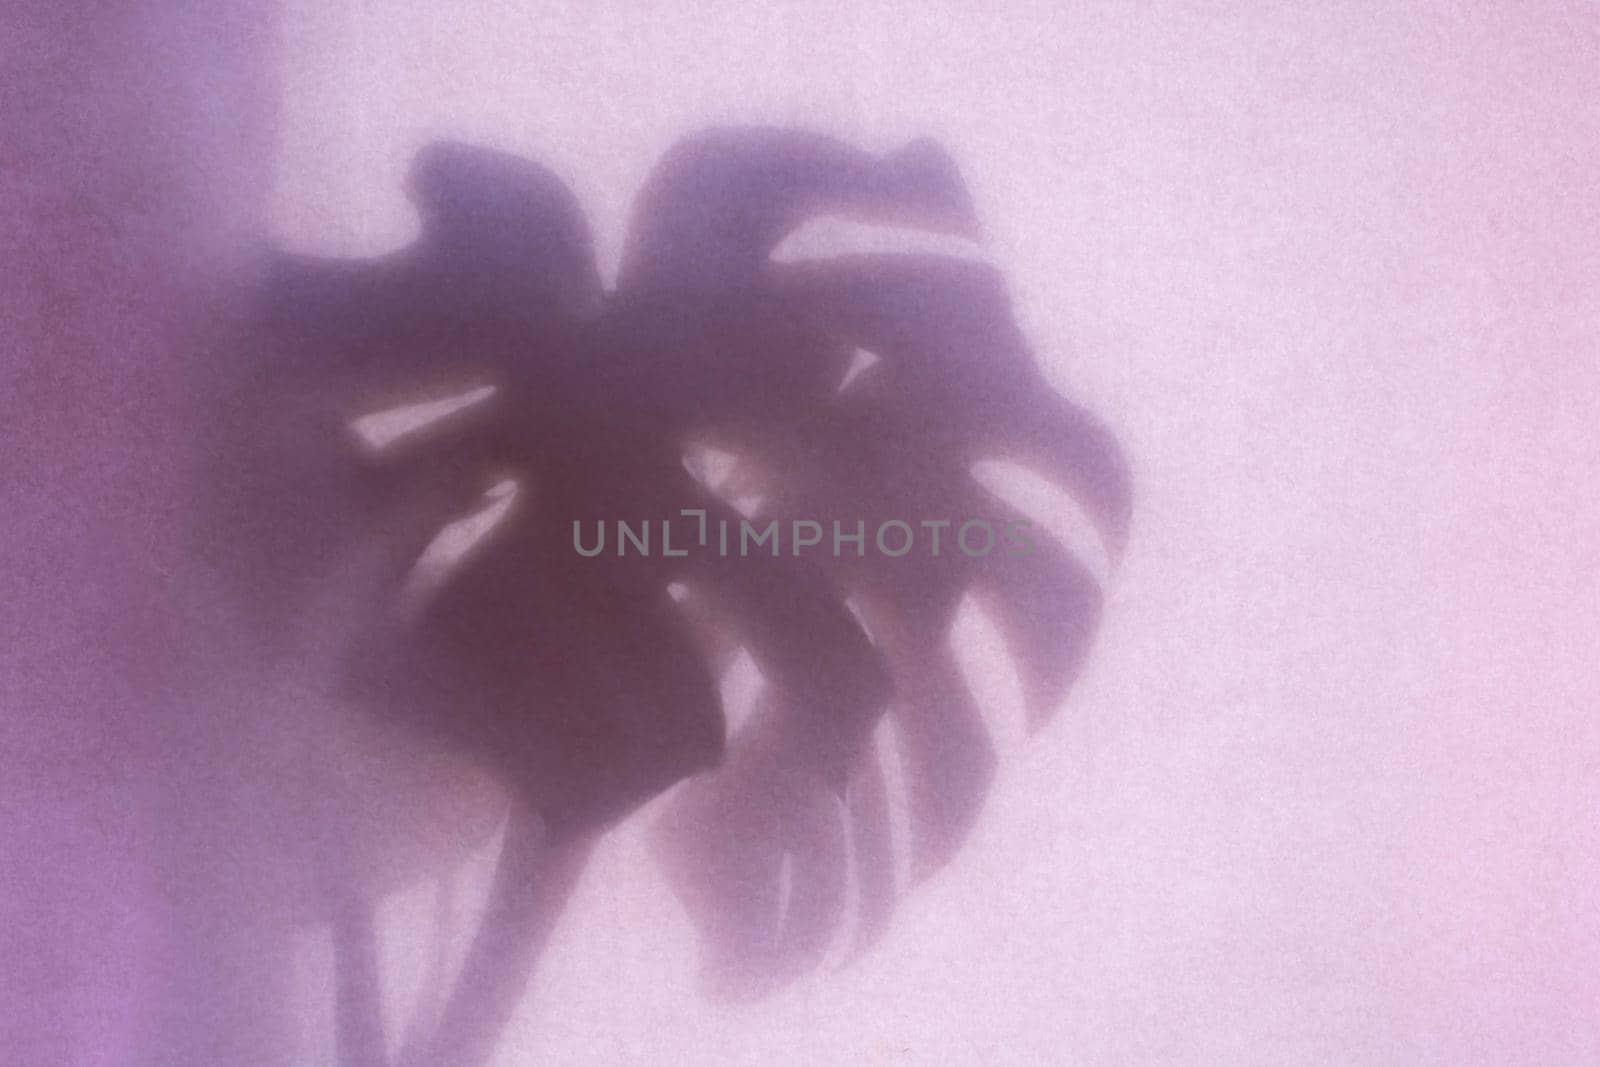 The shadow of a tropical monstera leaf on a lilac background by lapushka62